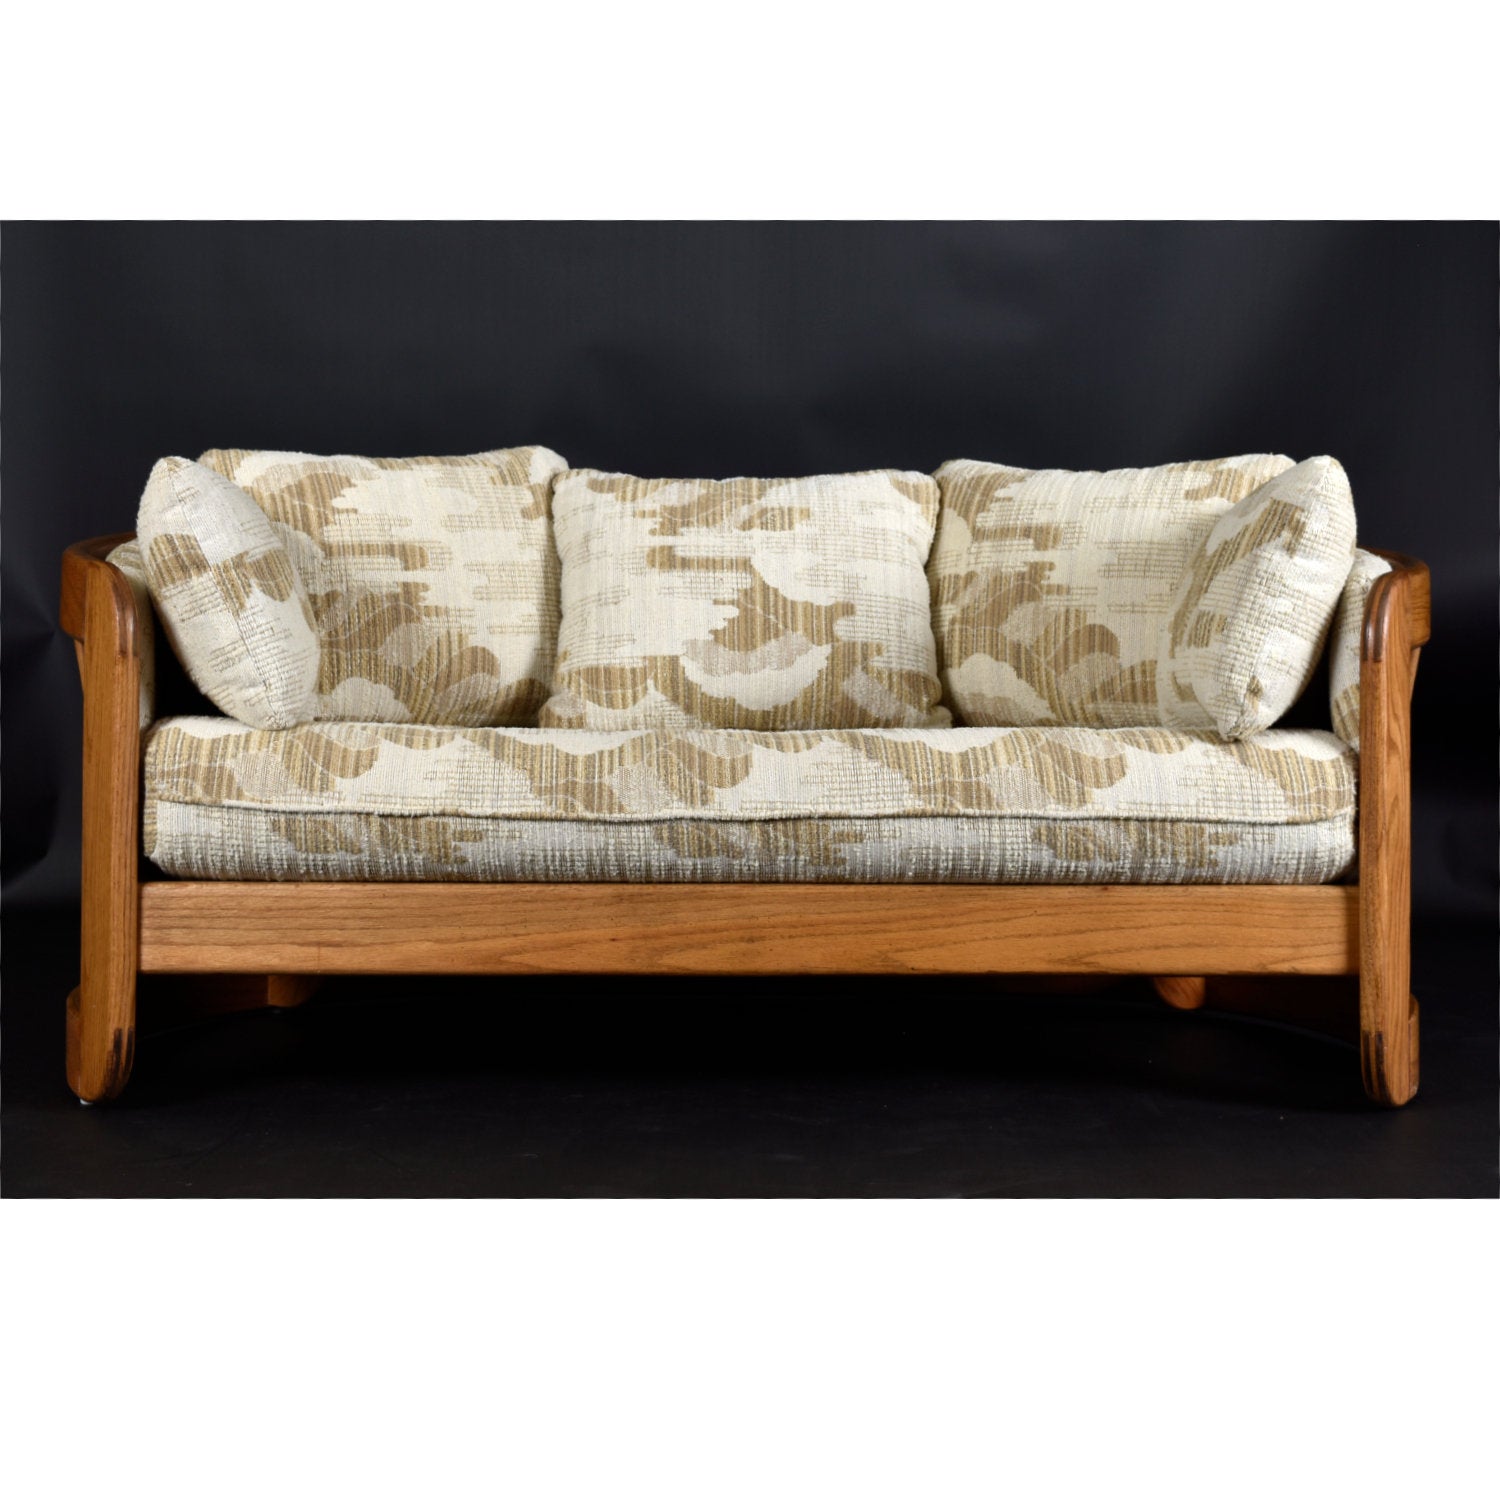 Comfort is king with this stylish vintage 1980s barrel shaped loveseat sofa by Howard Furniture. American made, solid oak throughout! The ultra cozy loveseat is wide and padded with plush pillows. The semi-circular surrounds the body, as if it’s